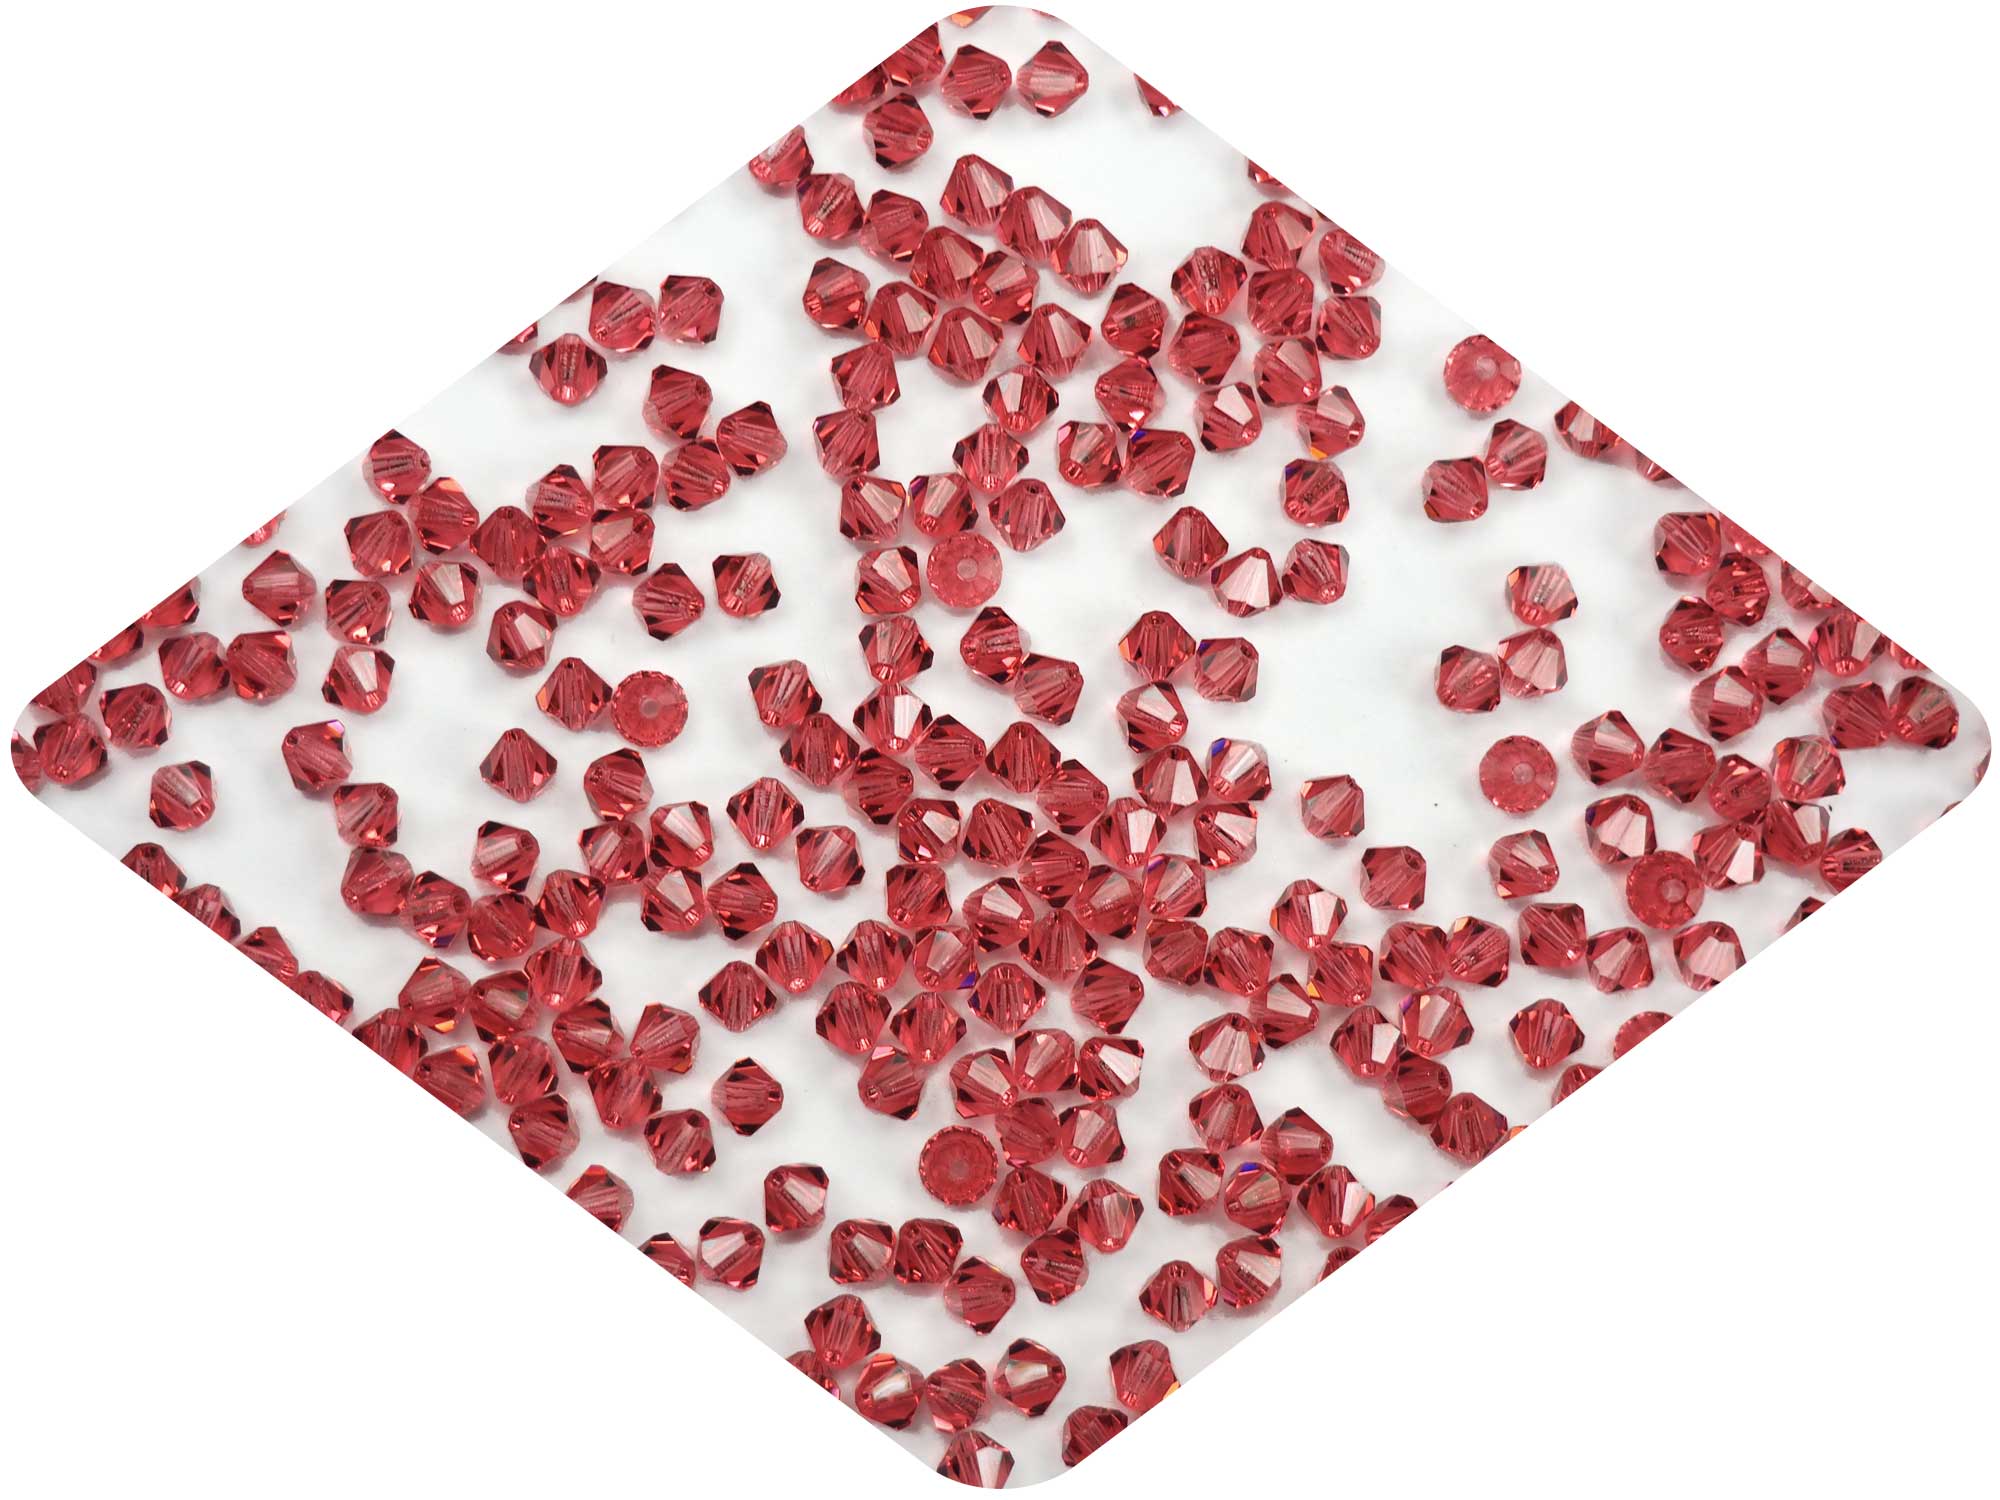 Indian Pink (Preciosa color), Czech Glass Beads, Machine Cut Bicones (MC Rondell, Diamond Shape), red pink crystals